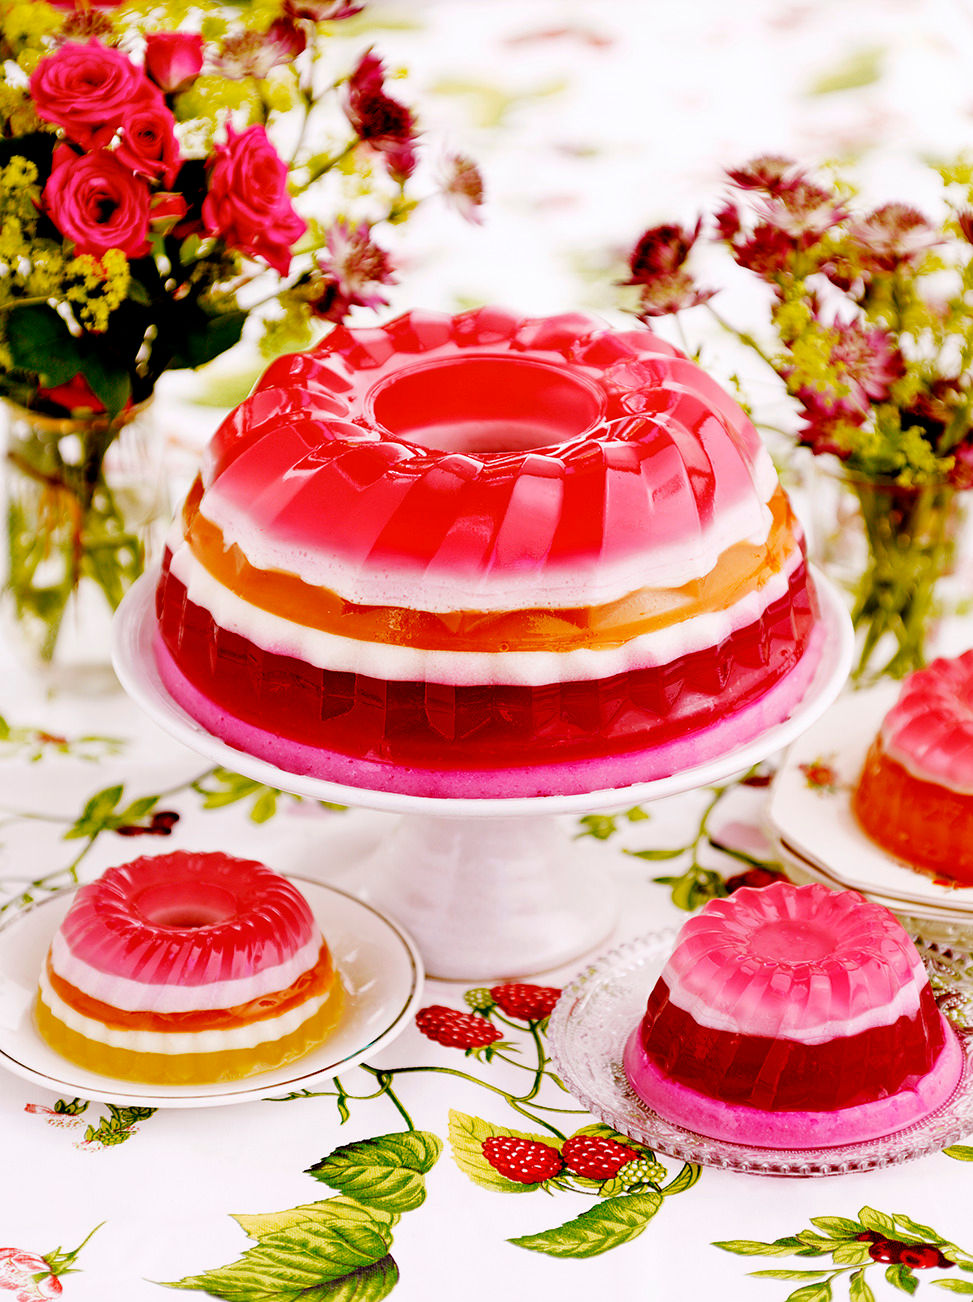 Sponge cake with fruit and jelly - Jacek Placek - Homemade cakes, Cakes,  Cookies